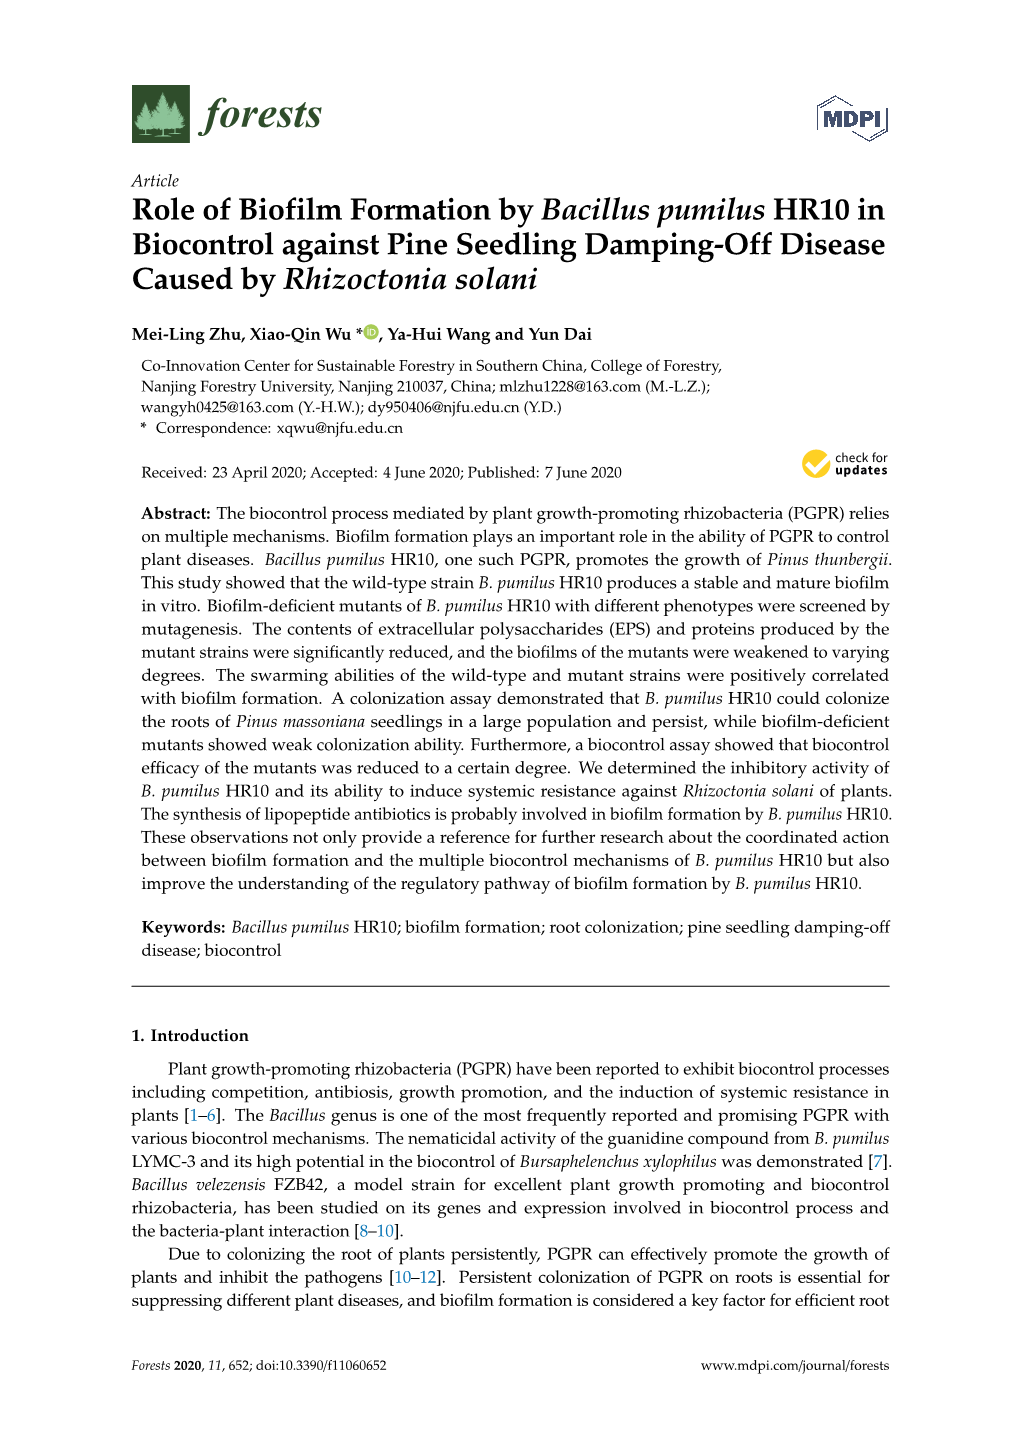 Role of Biofilm Formation by Bacillus Pumilus HR10 in Biocontrol Against Pine Seedling Damping-Off Disease Caused by Rhizoctonia Solani